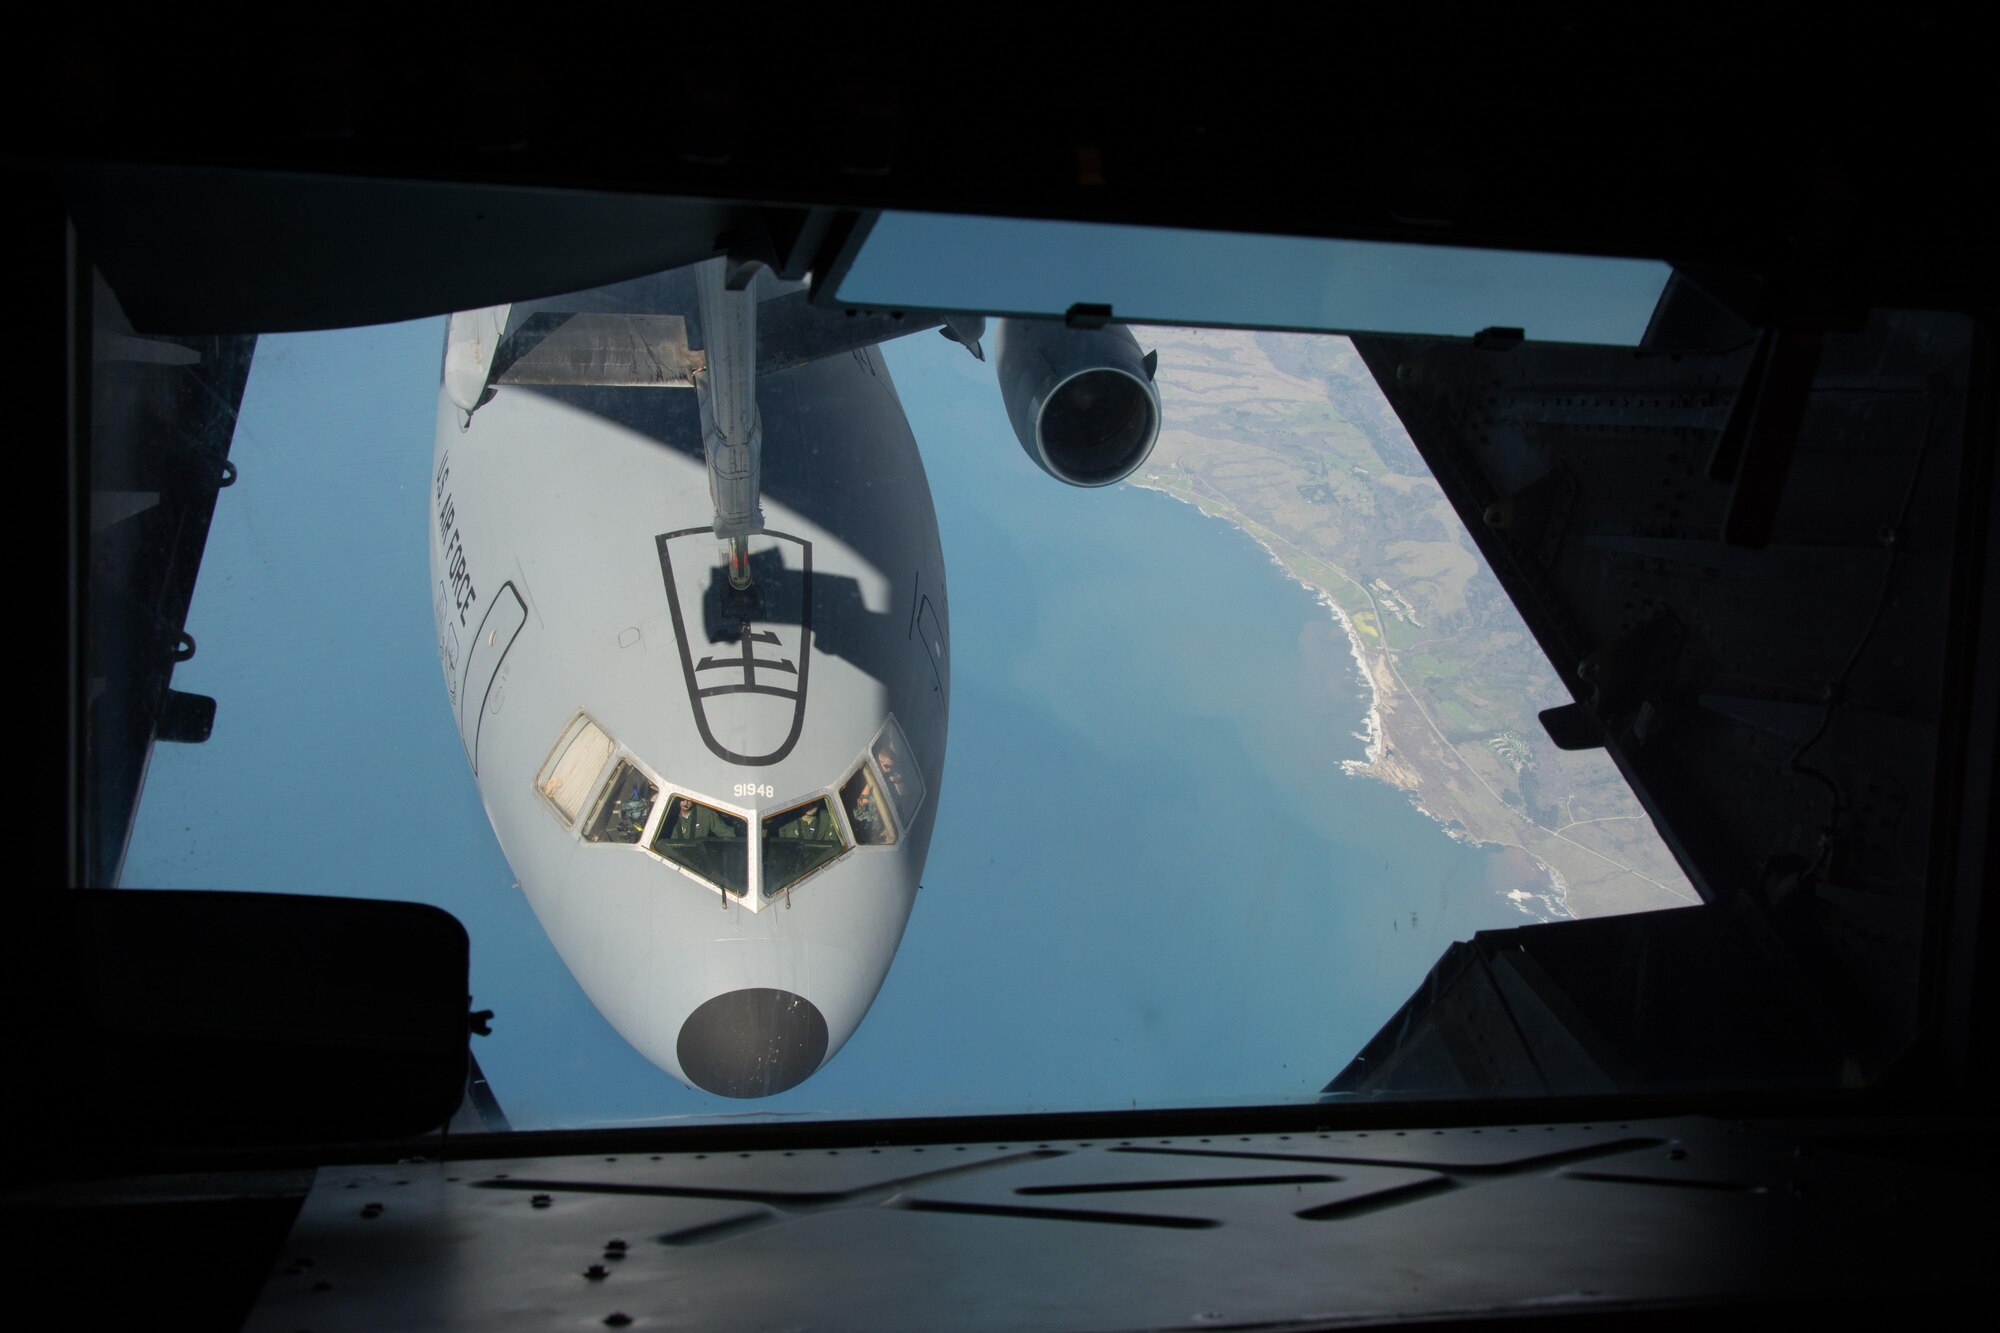 Aircrews from the 79th Air Refuleing Squadron executed multiple KC-10 to KC-10 refuelings over the West Coast, Feb. 12, 2017. The tanker crews were taking part in exercise Patriot Wyvern, the 349th Air Mobility Wing's periodic training exercise developed to grow and strengthen primary job skills of Citizen Airmen. (U.S. Air Force photo by Senior Airman Chris Massey)